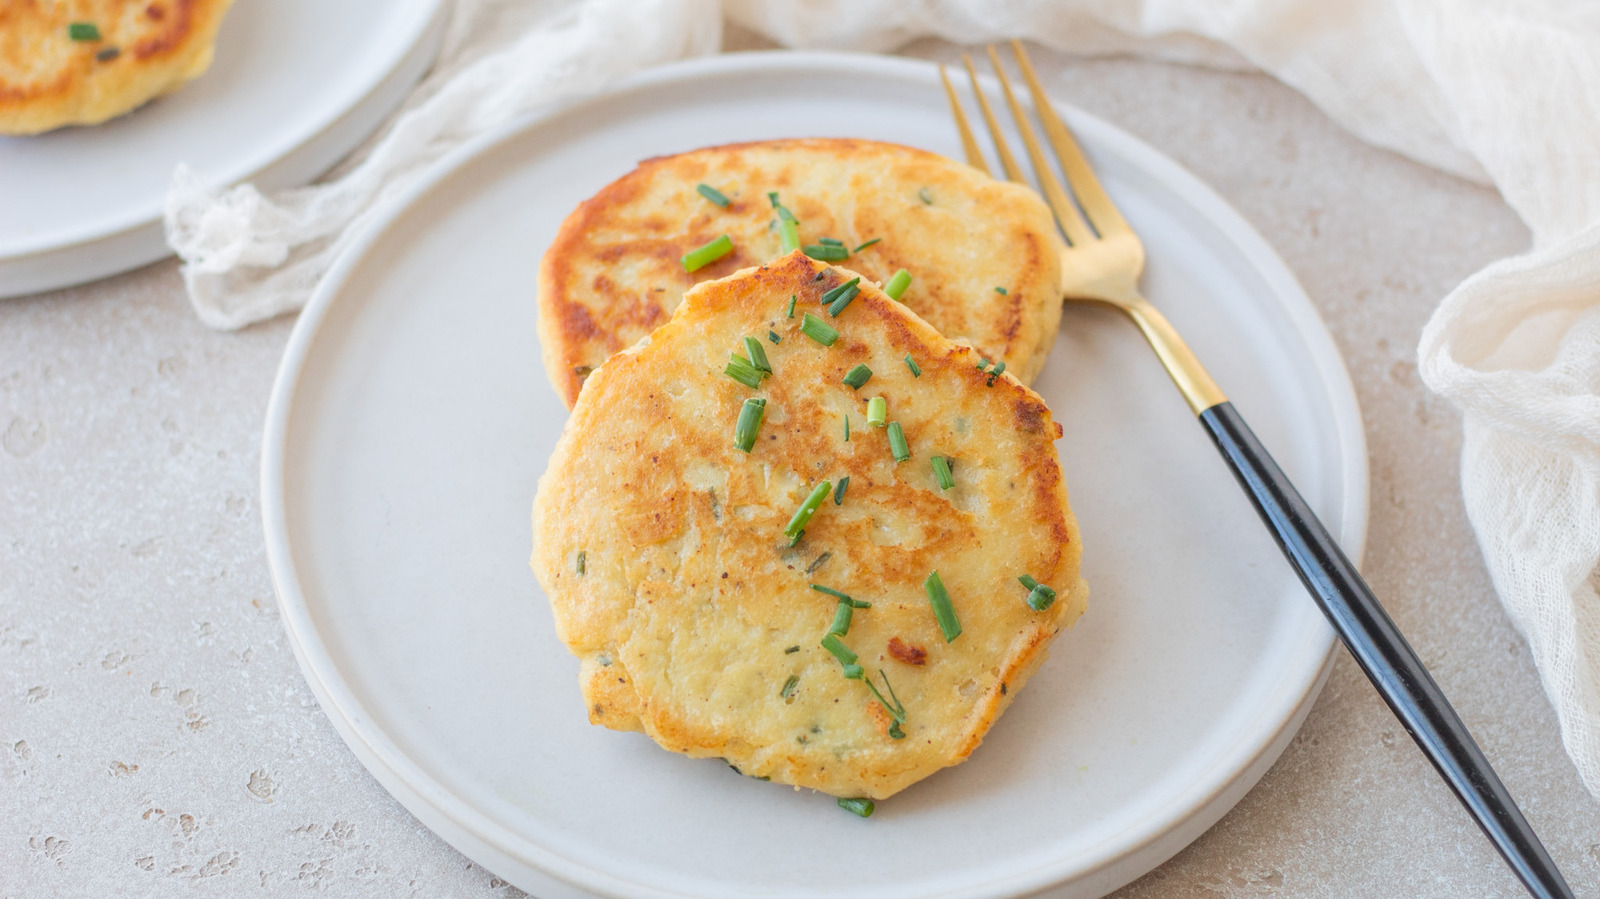 Potato Cakes From Mashed Potatoes - Foxes Love Lemons